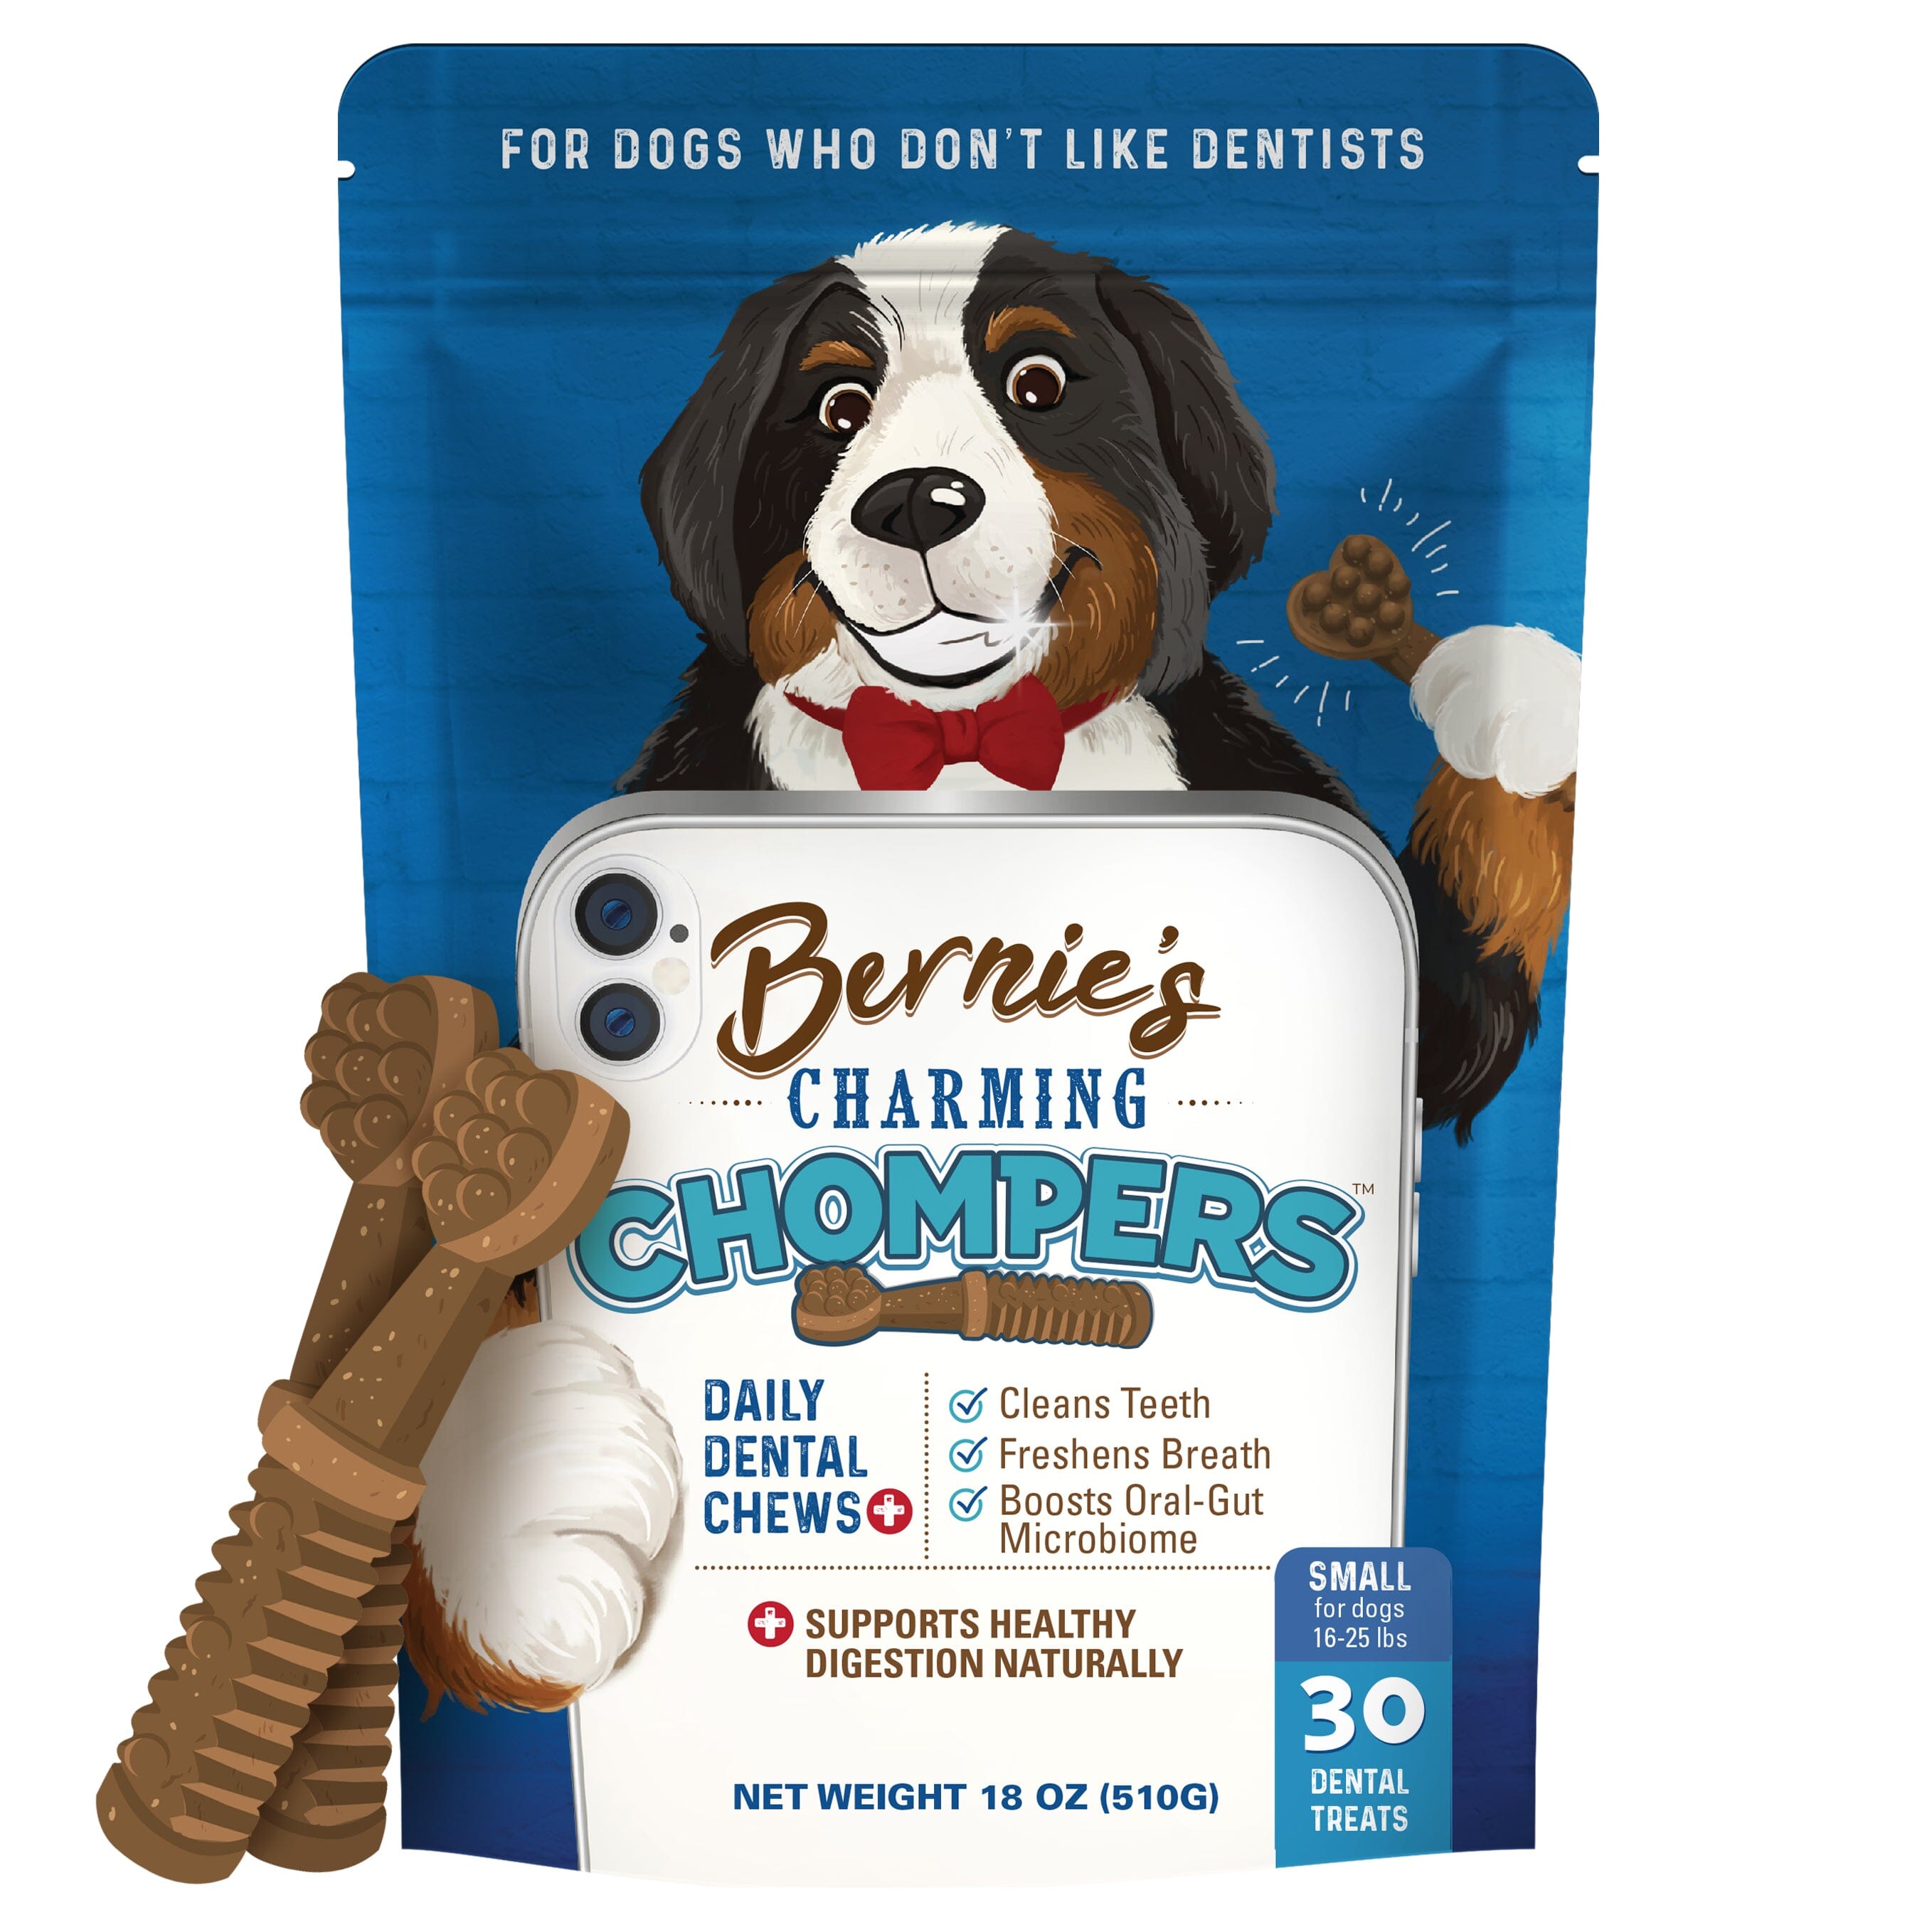 Bernie's Charming Chompers Digestive Supplement Bernie's Best Small Dogs (16-25 lb) 18 oz - 30 Count 